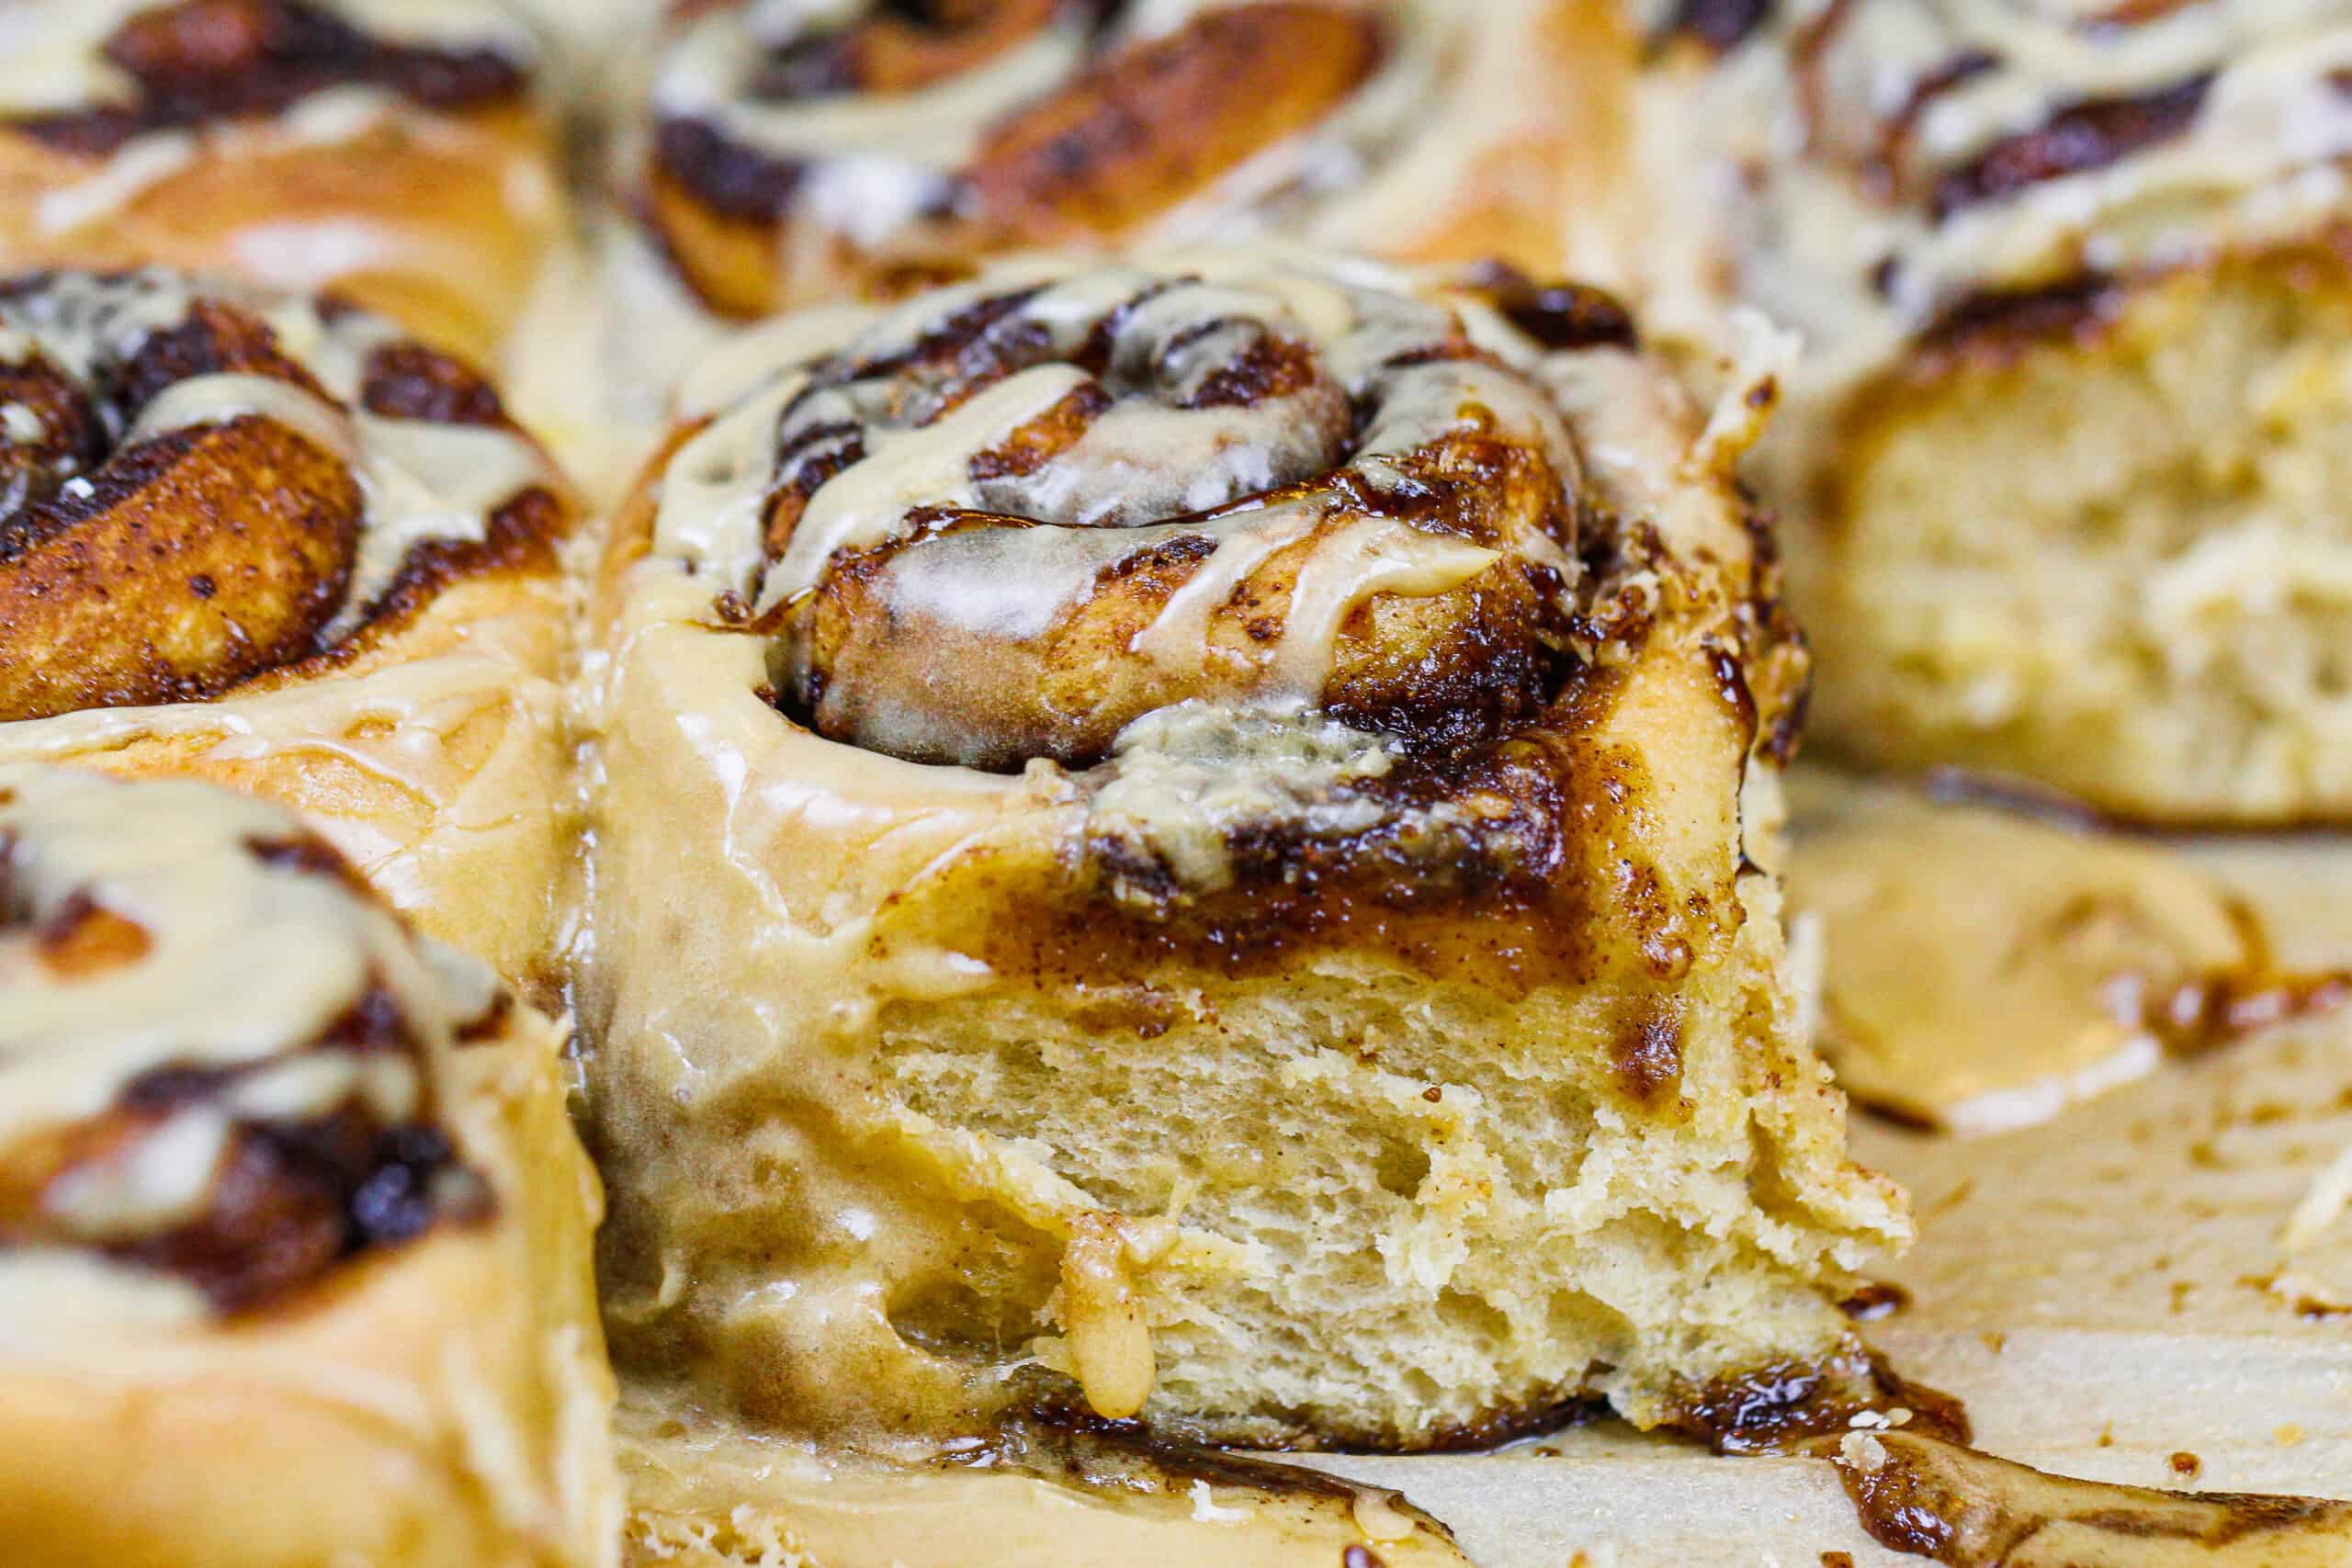 https://chelsweets.com/wp-content/uploads/2020/09/cinnamon-roll-on-parchment-horiz-scaled.jpg